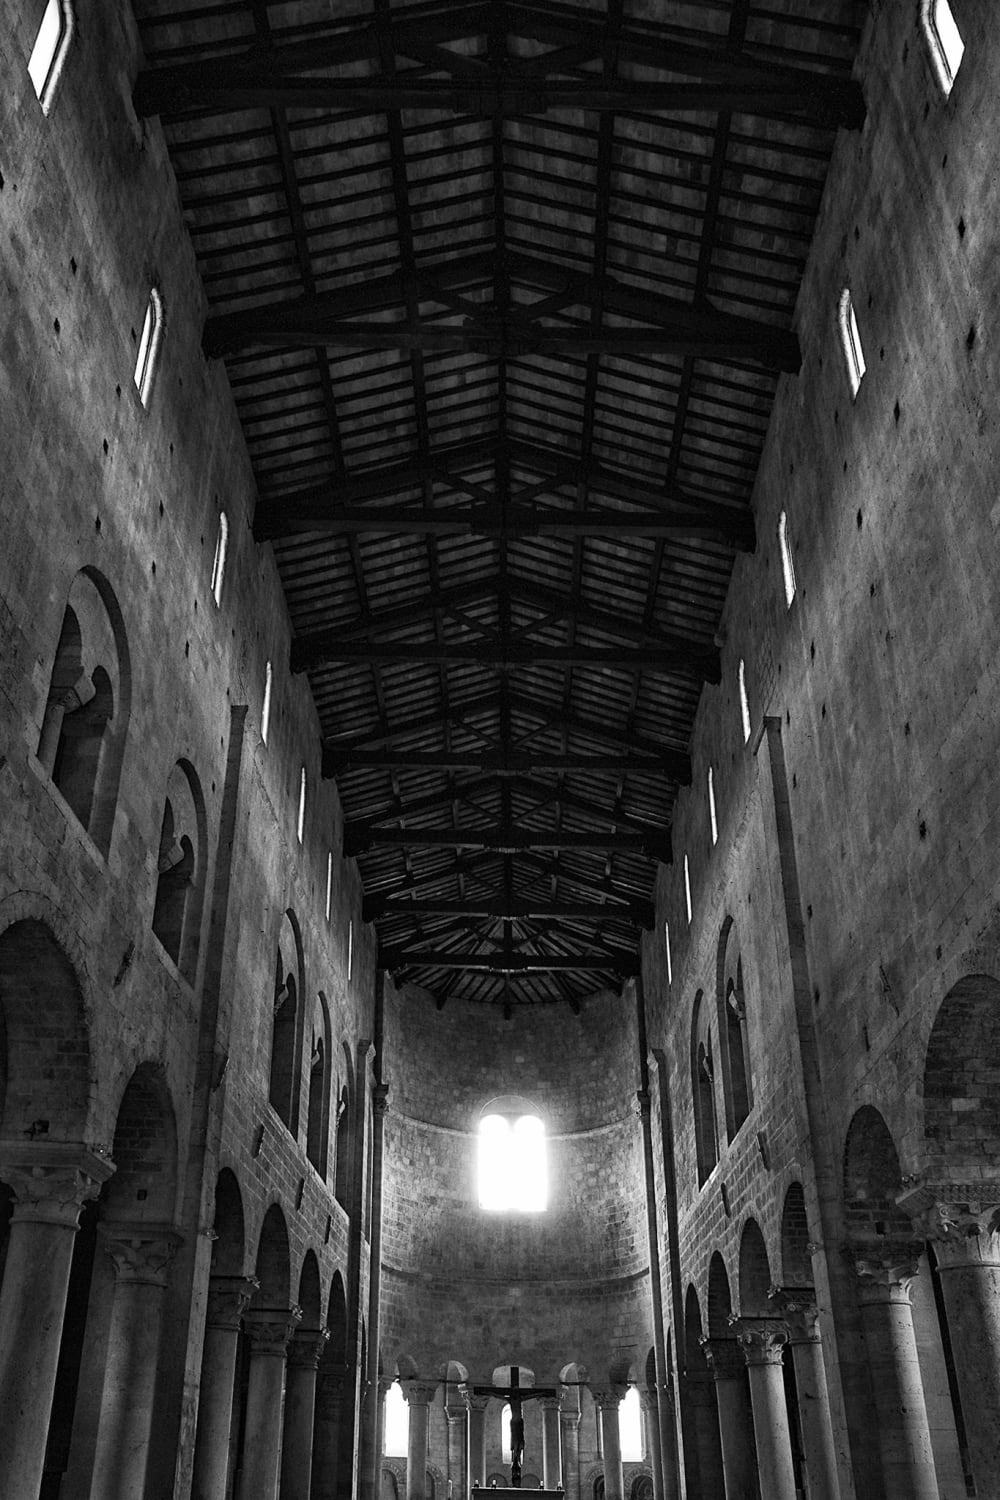 A Romanesque gem: the vast-looking interior of the actually tiny Sant'Antimo Abbey, near Montalcino, Tuscany